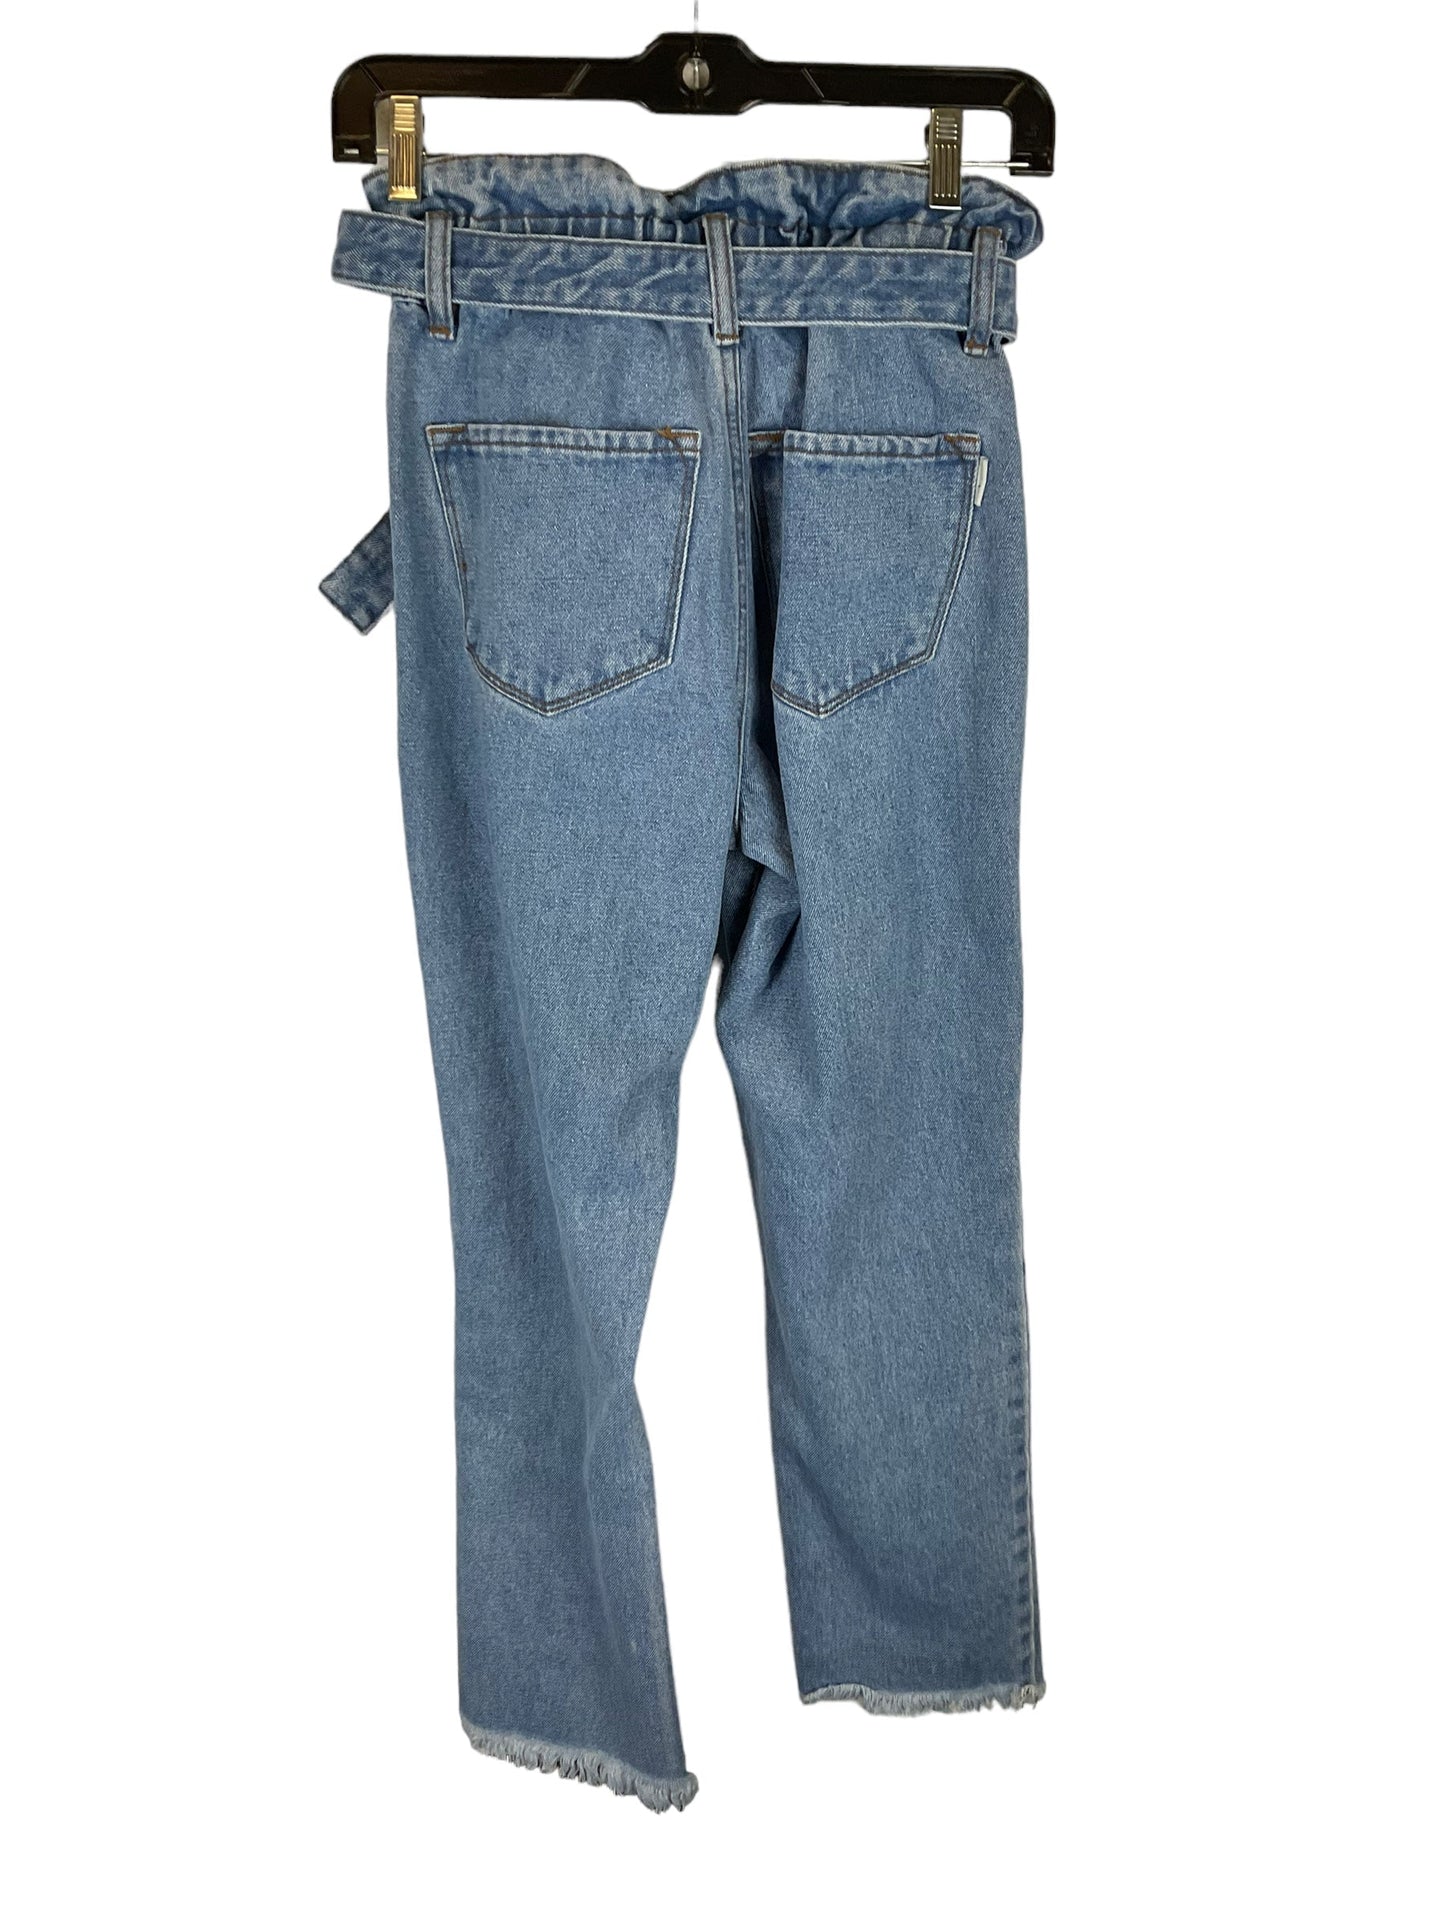 Jeans Straight By Clothes Mentor  Size: Xs